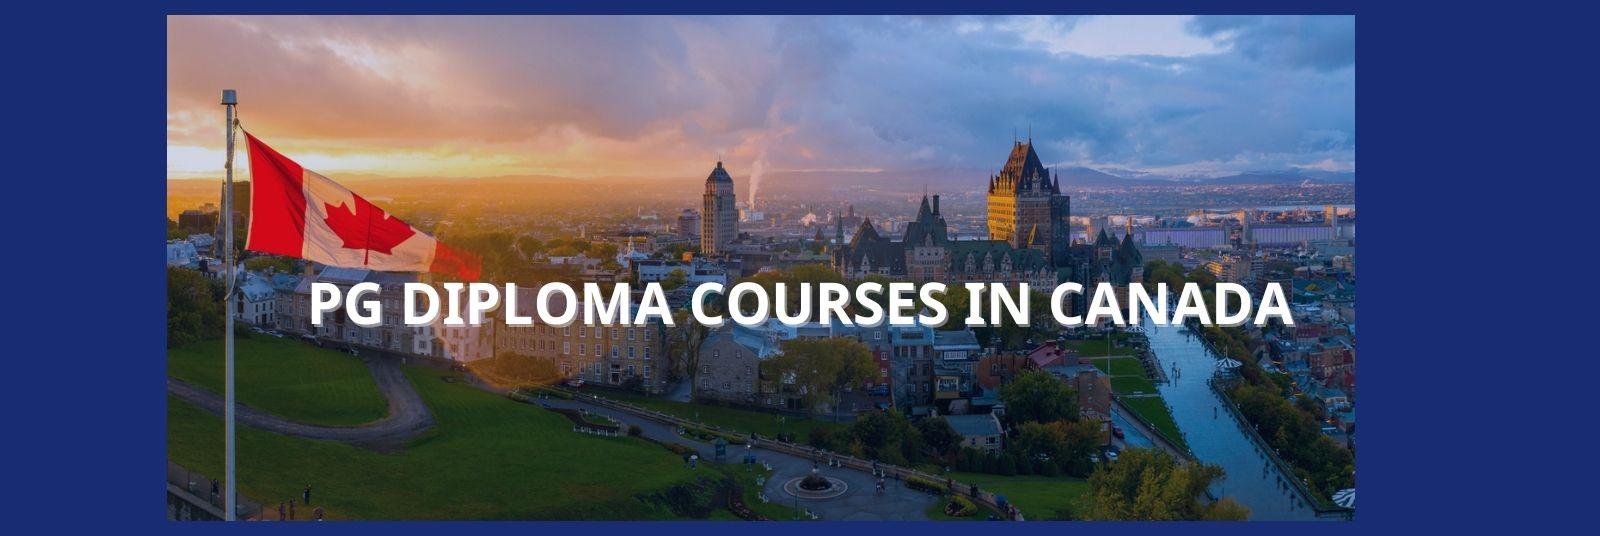 Popular PG Diploma courses in Canada|2021